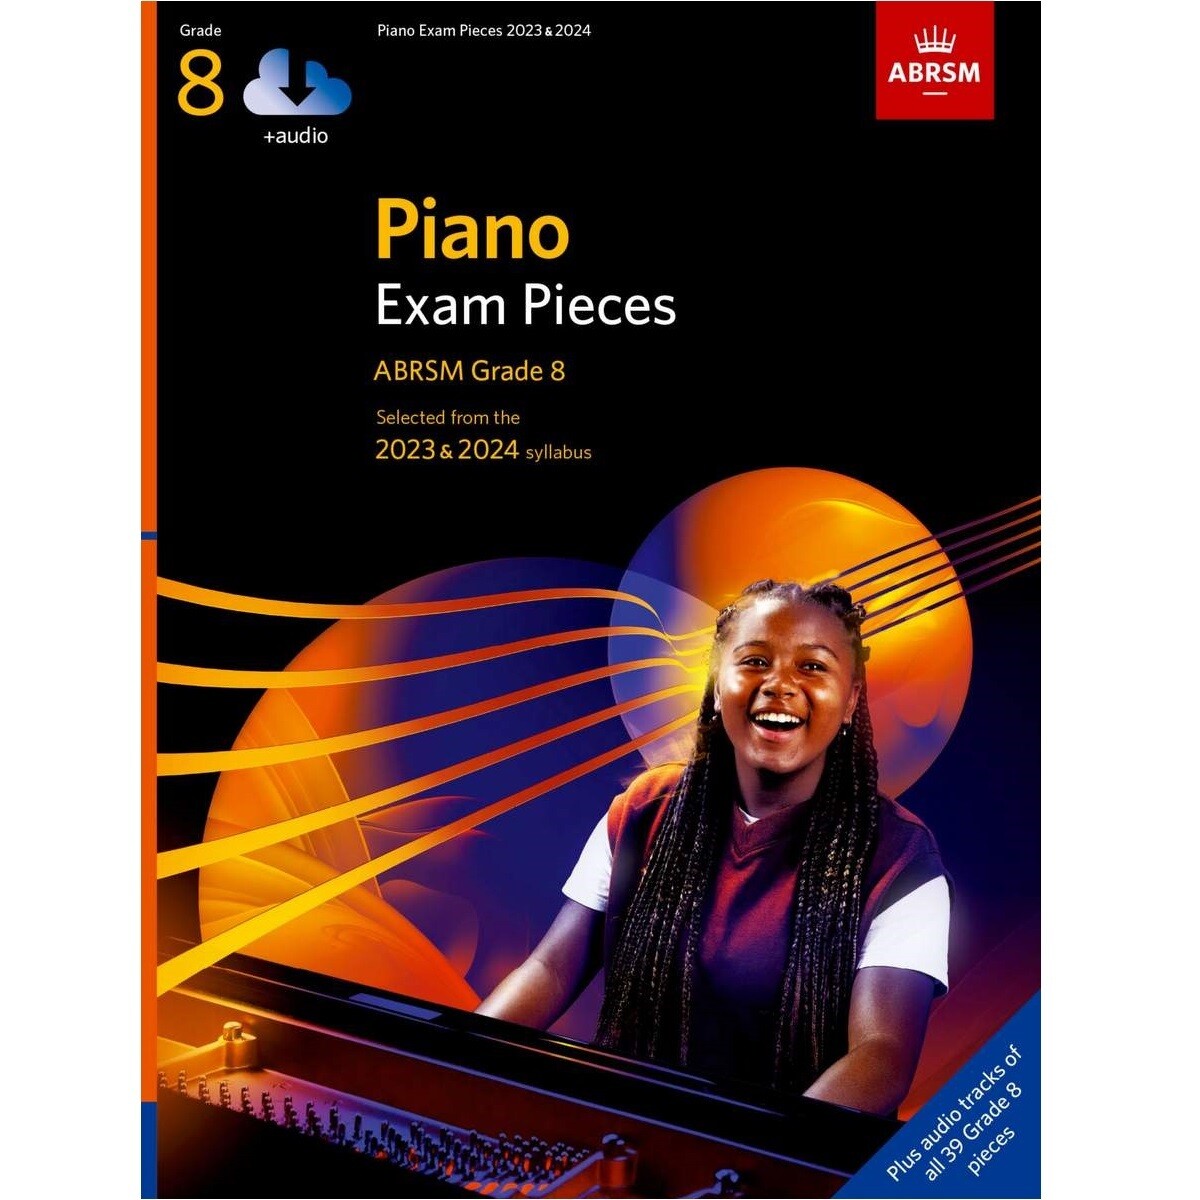 ABRSM Piano Exam Pieces 2023 and 2024 - Grade 8 (Book with Online Audio)